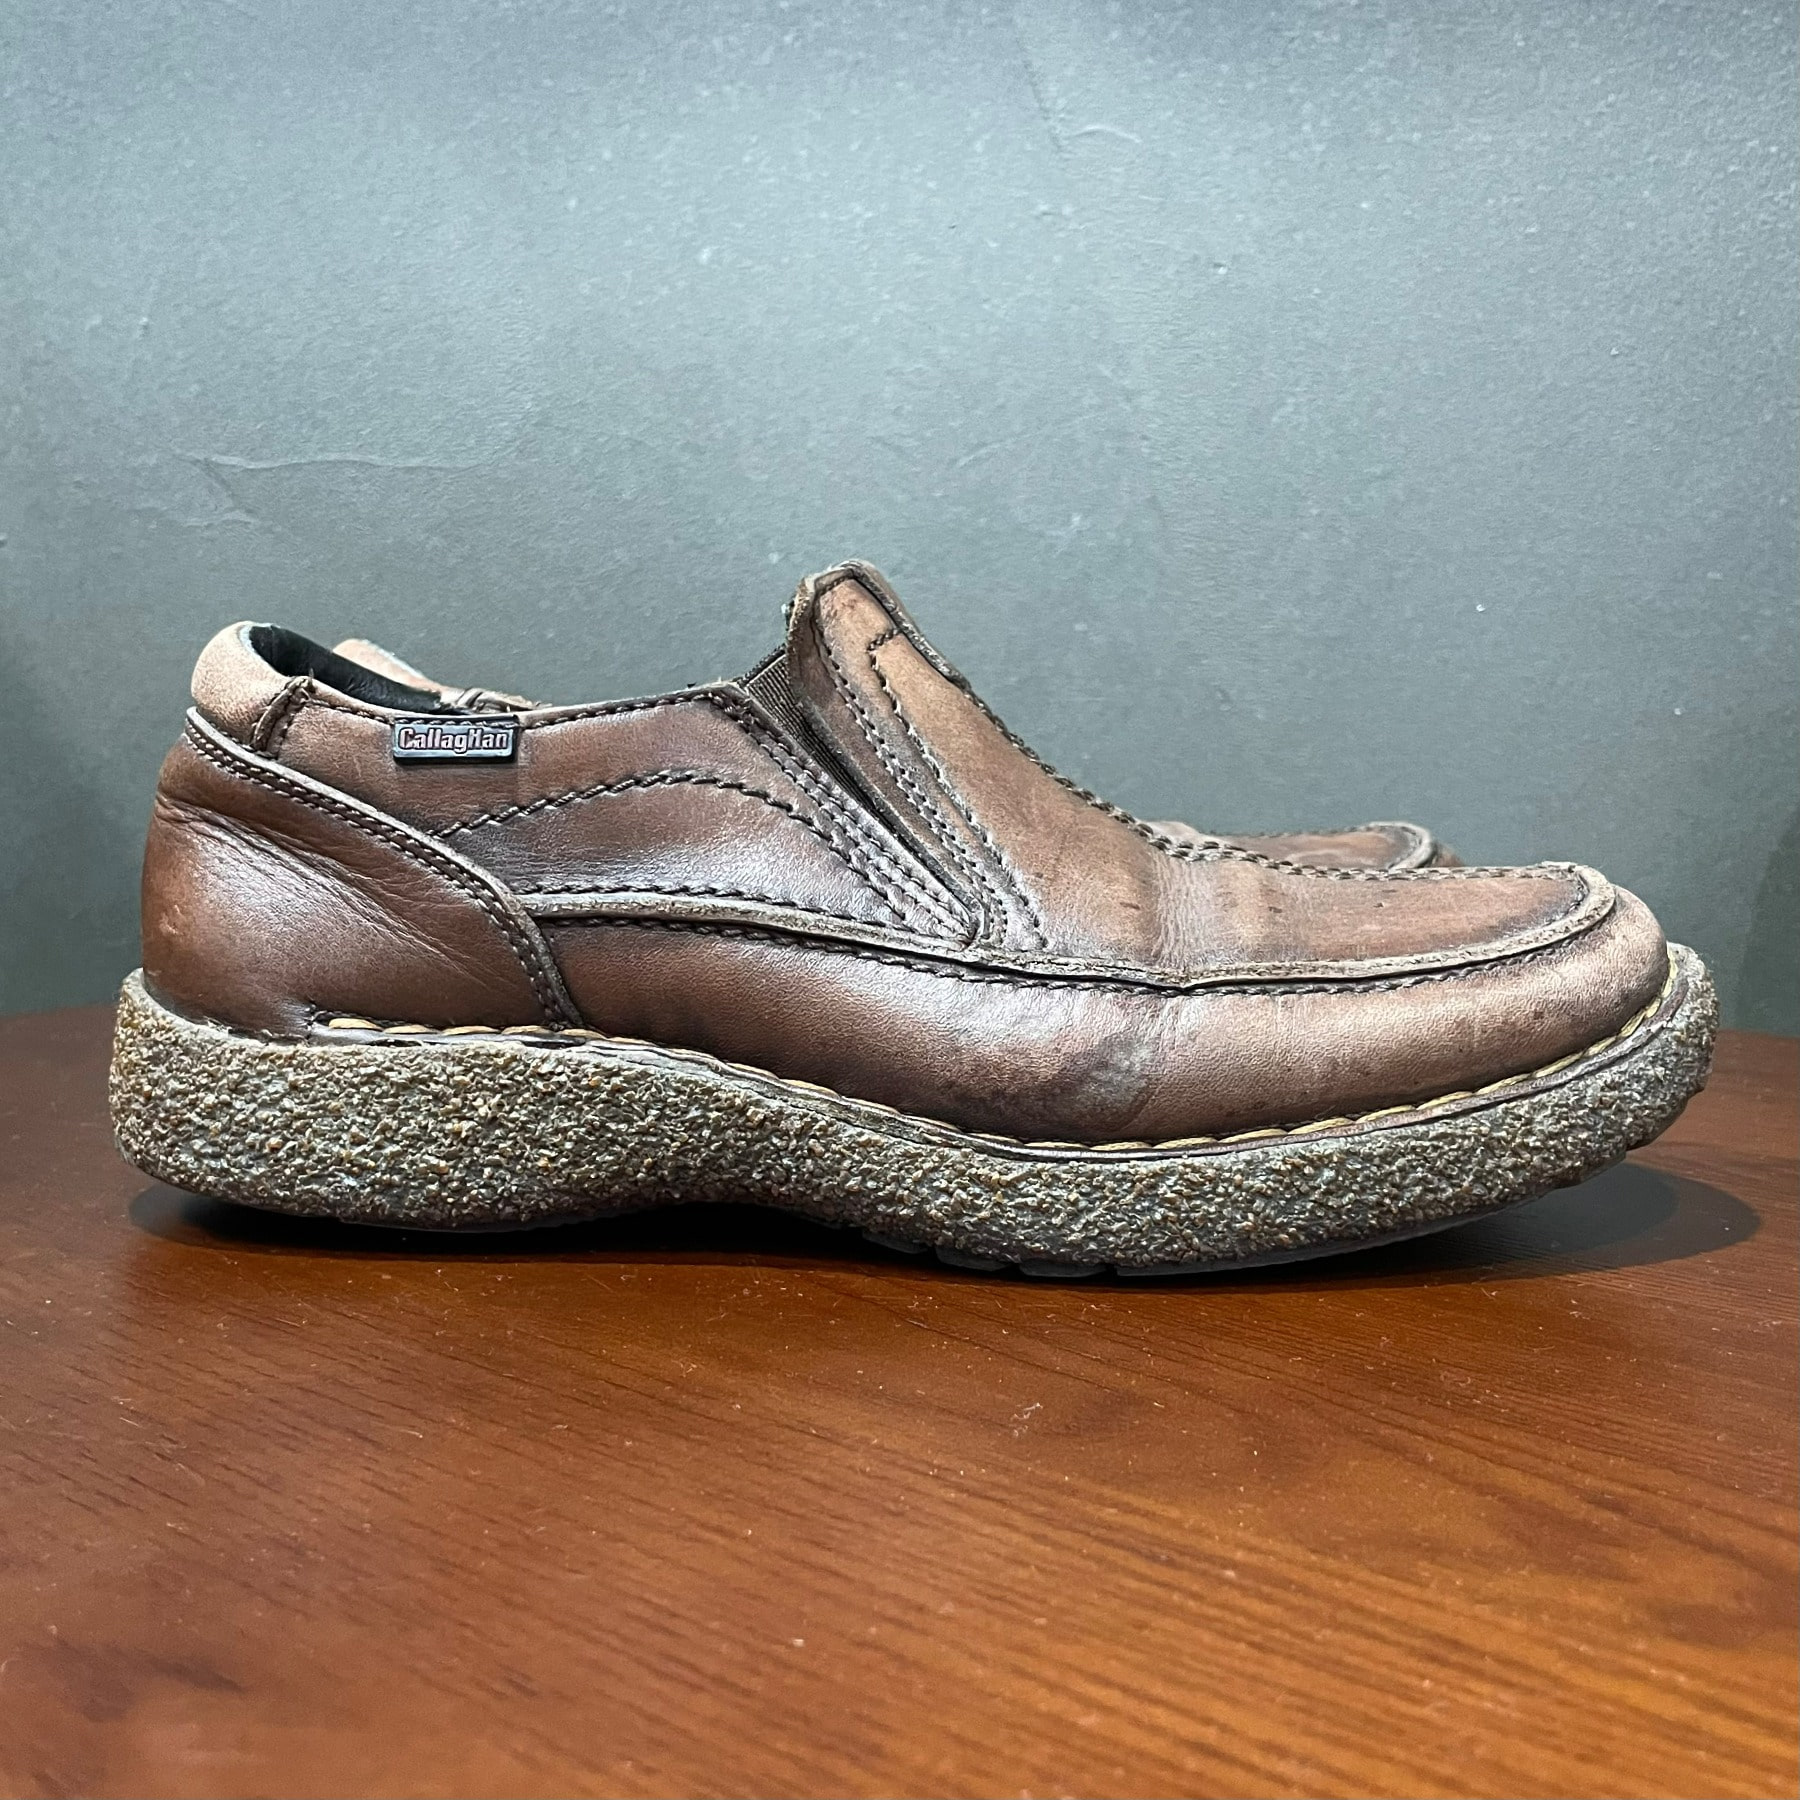 Callaghan Shoes (Made in SPAIN) - EU 40 (약 260~265mm)